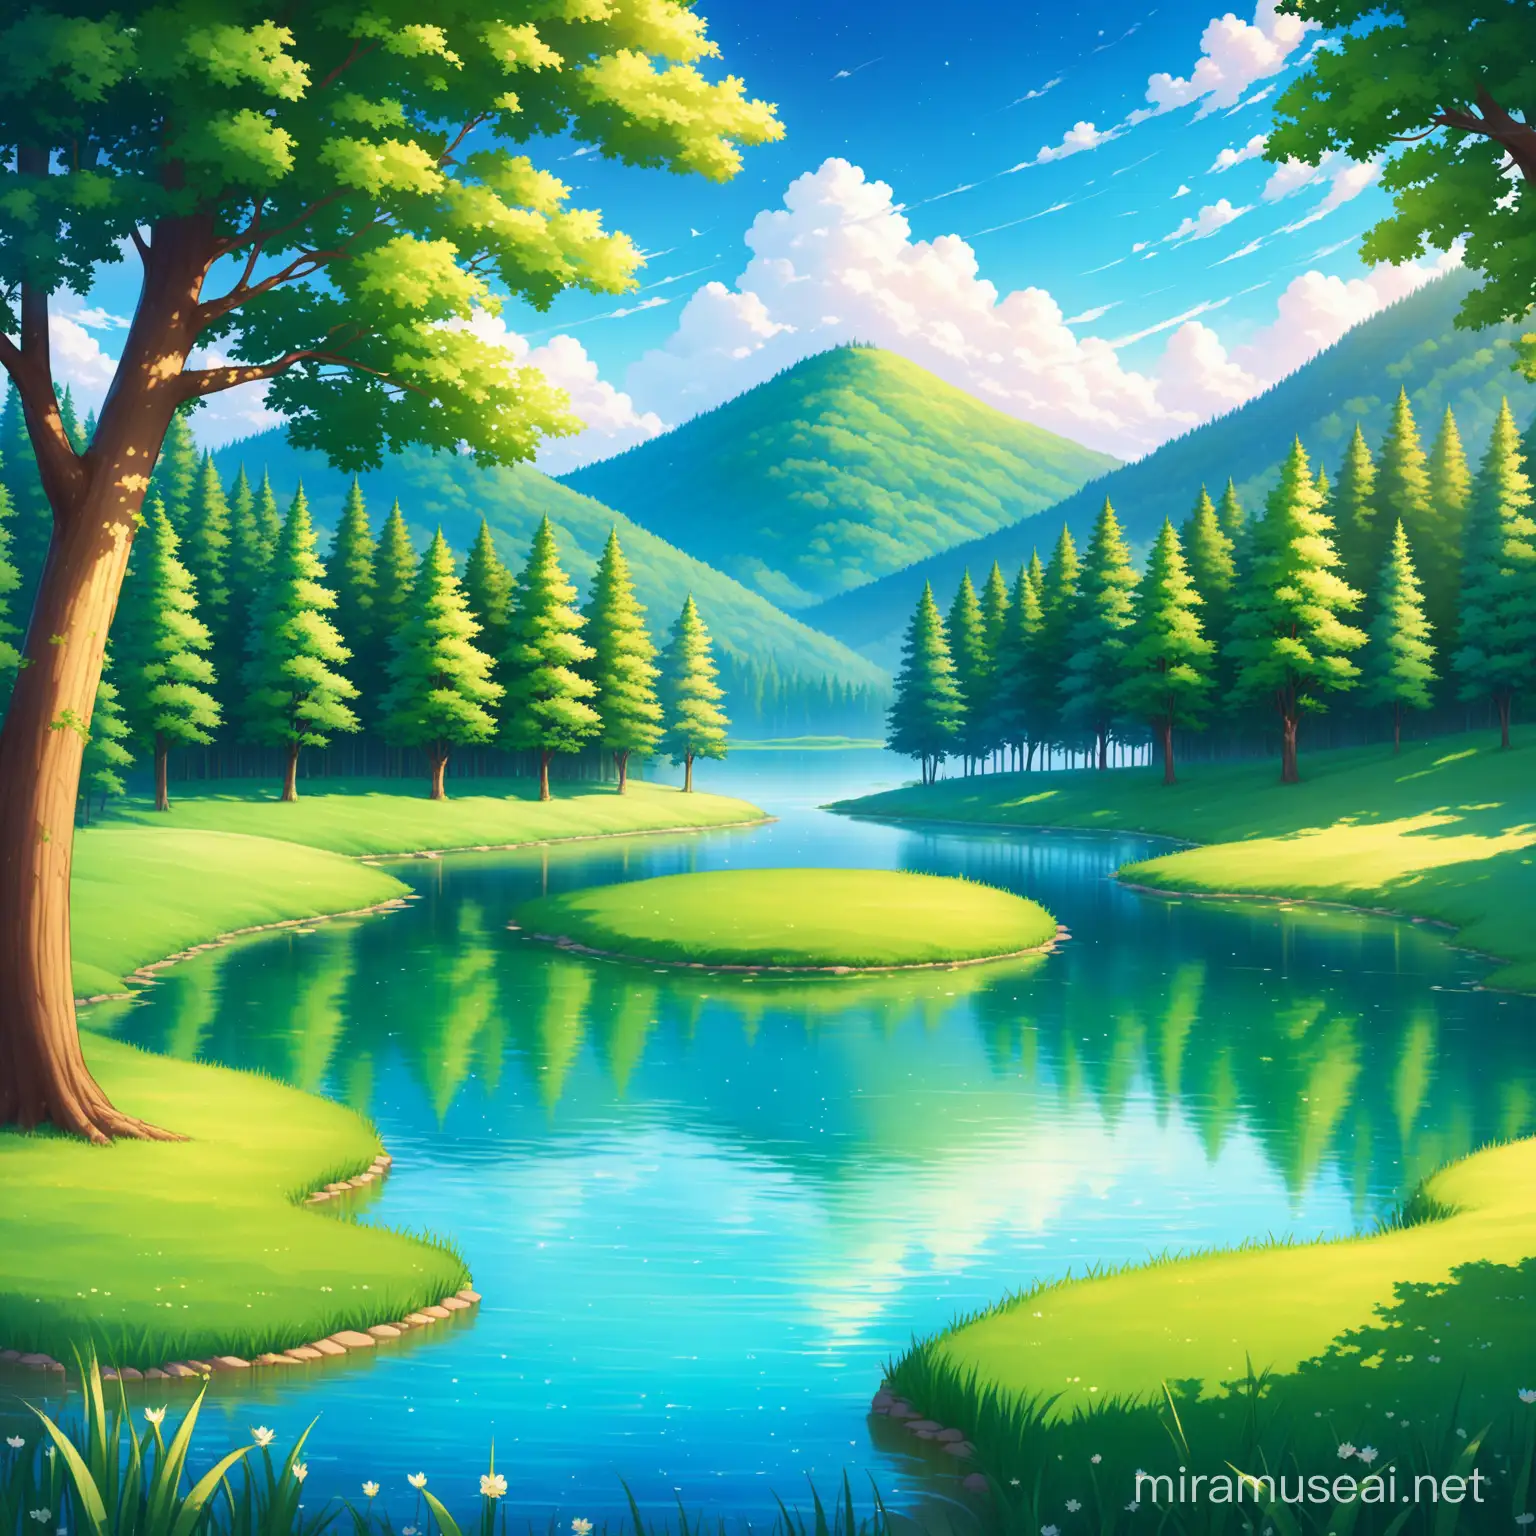 Enchanted Pond Surrounded by Lush Forest and Majestic Hills